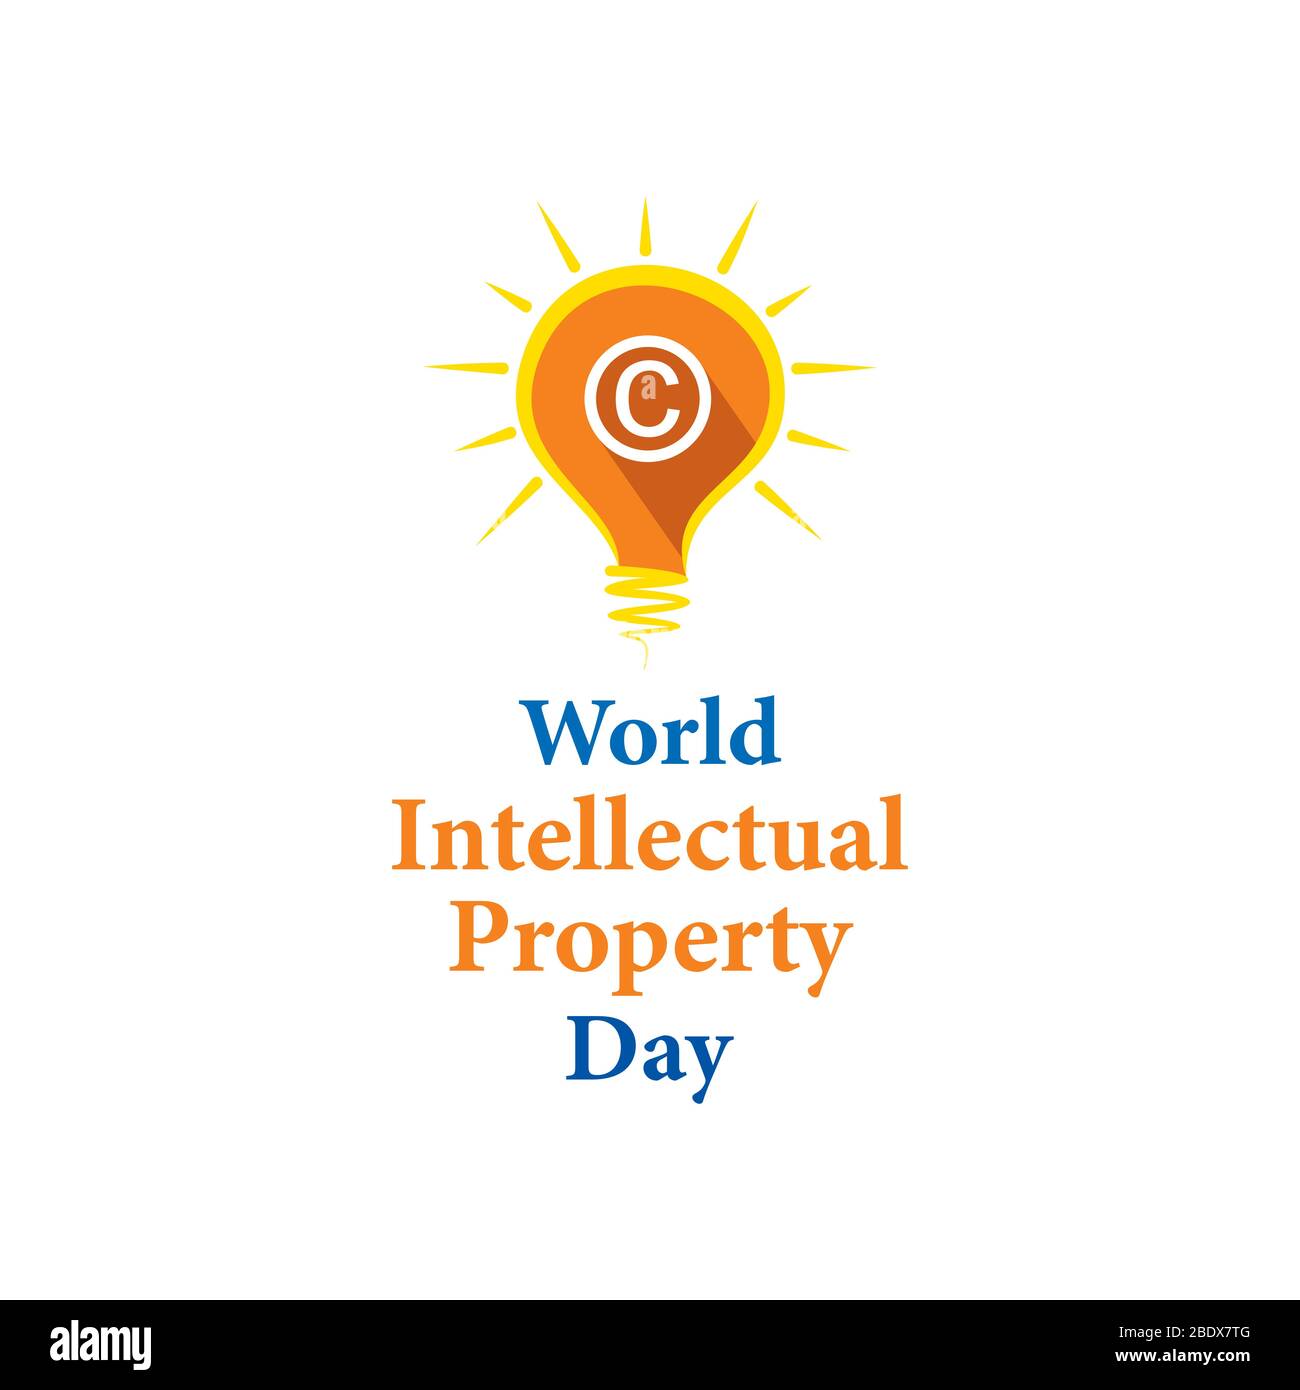 World Intellectual Property Day poster design. Vector illustration background. Stock Vector